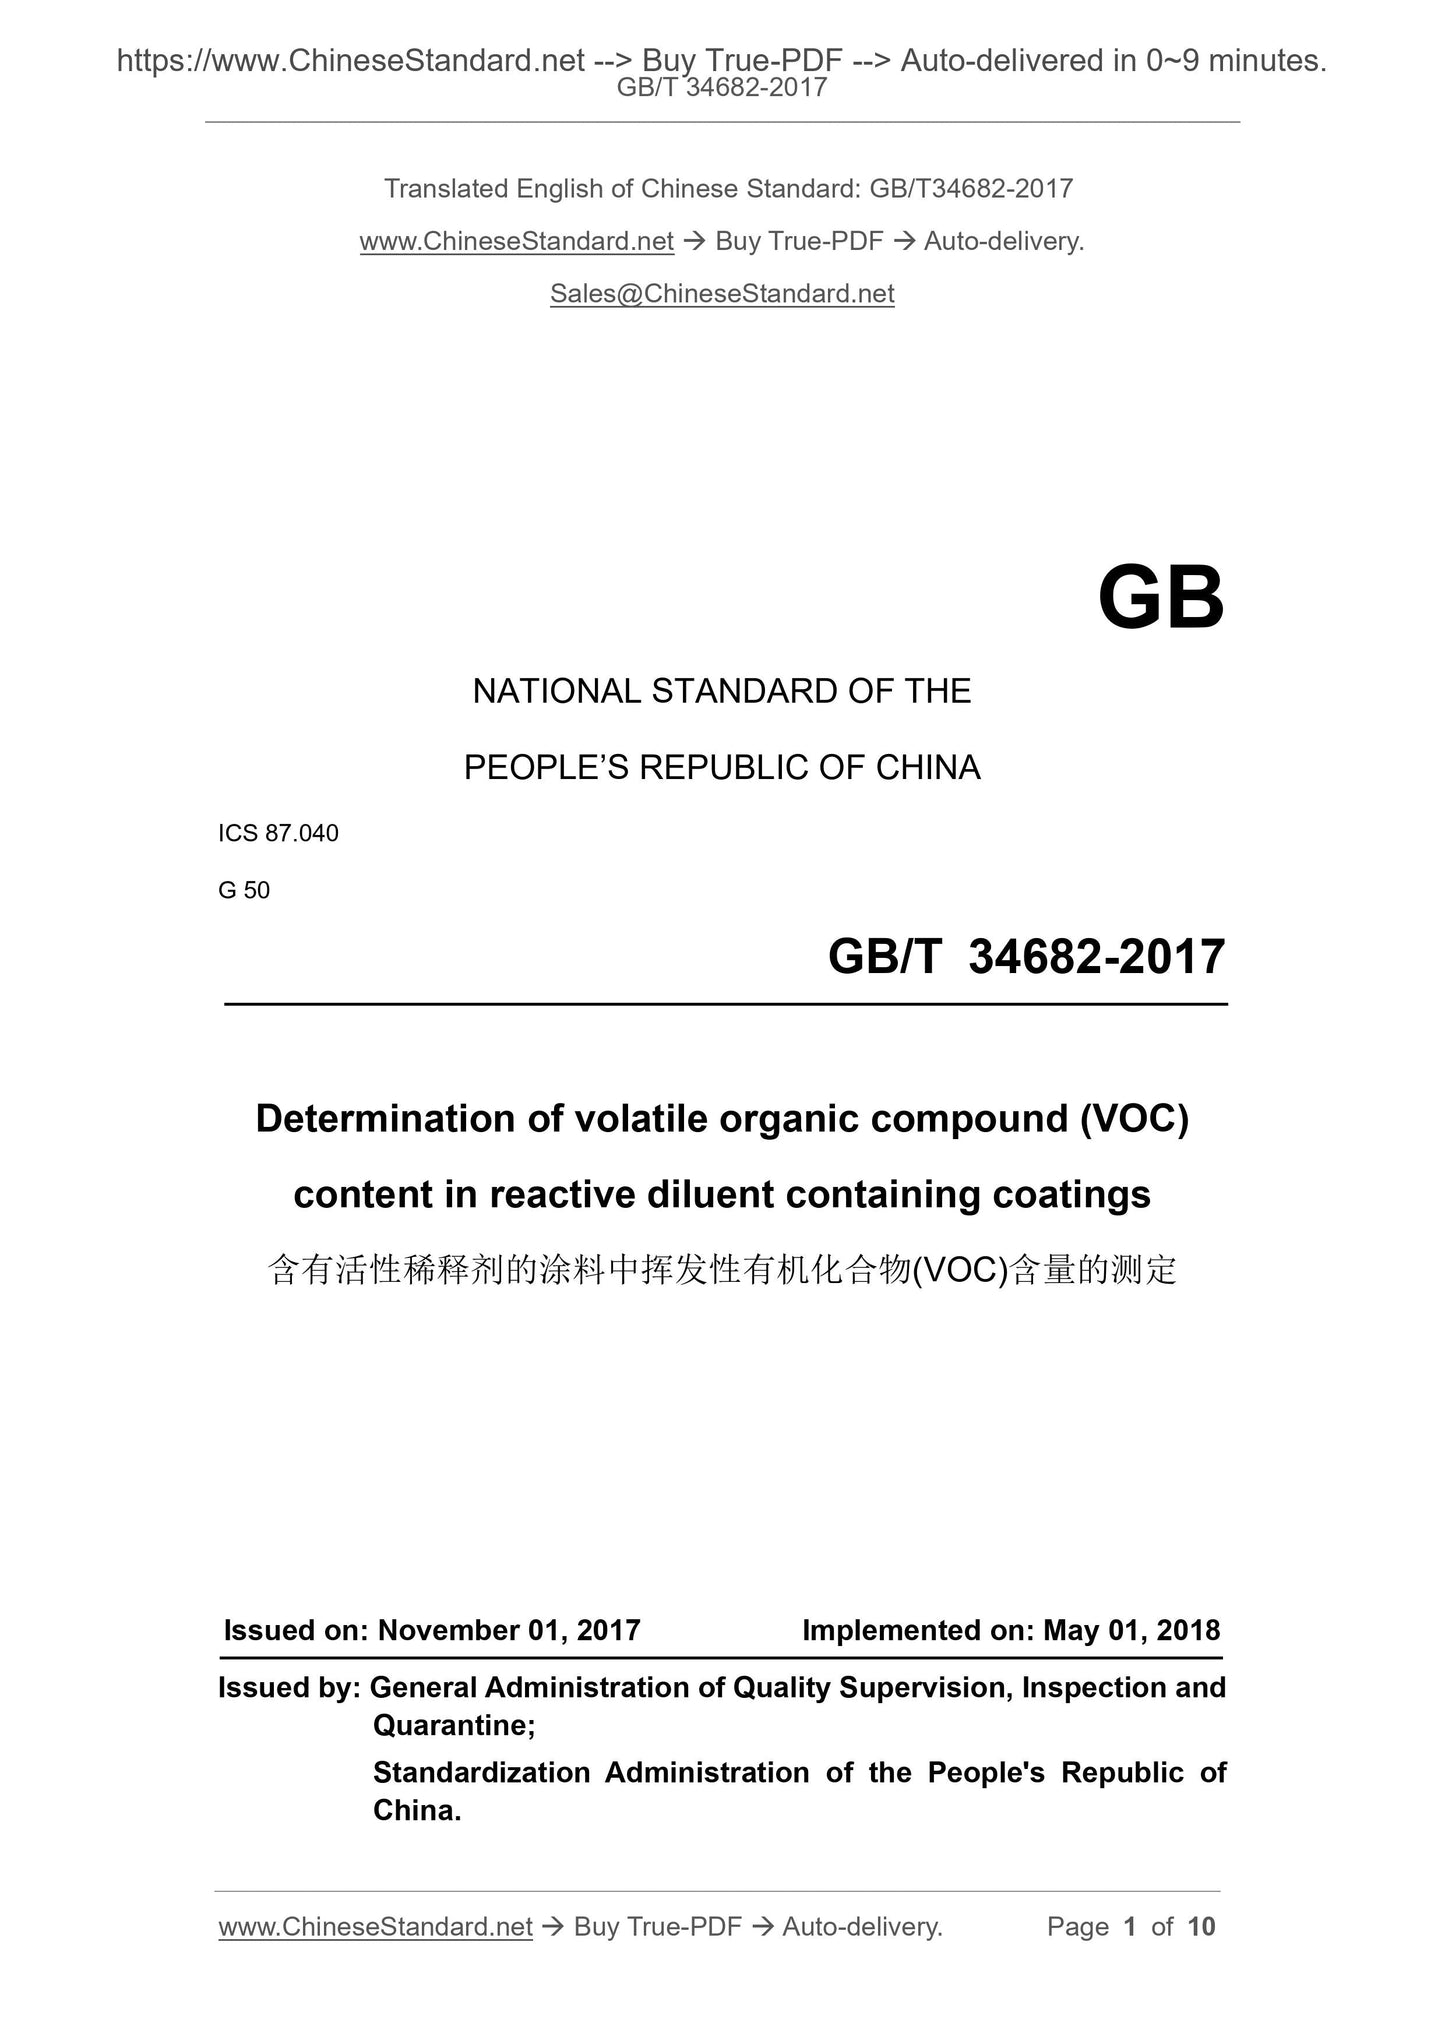 GB/T 34682-2017 Page 1